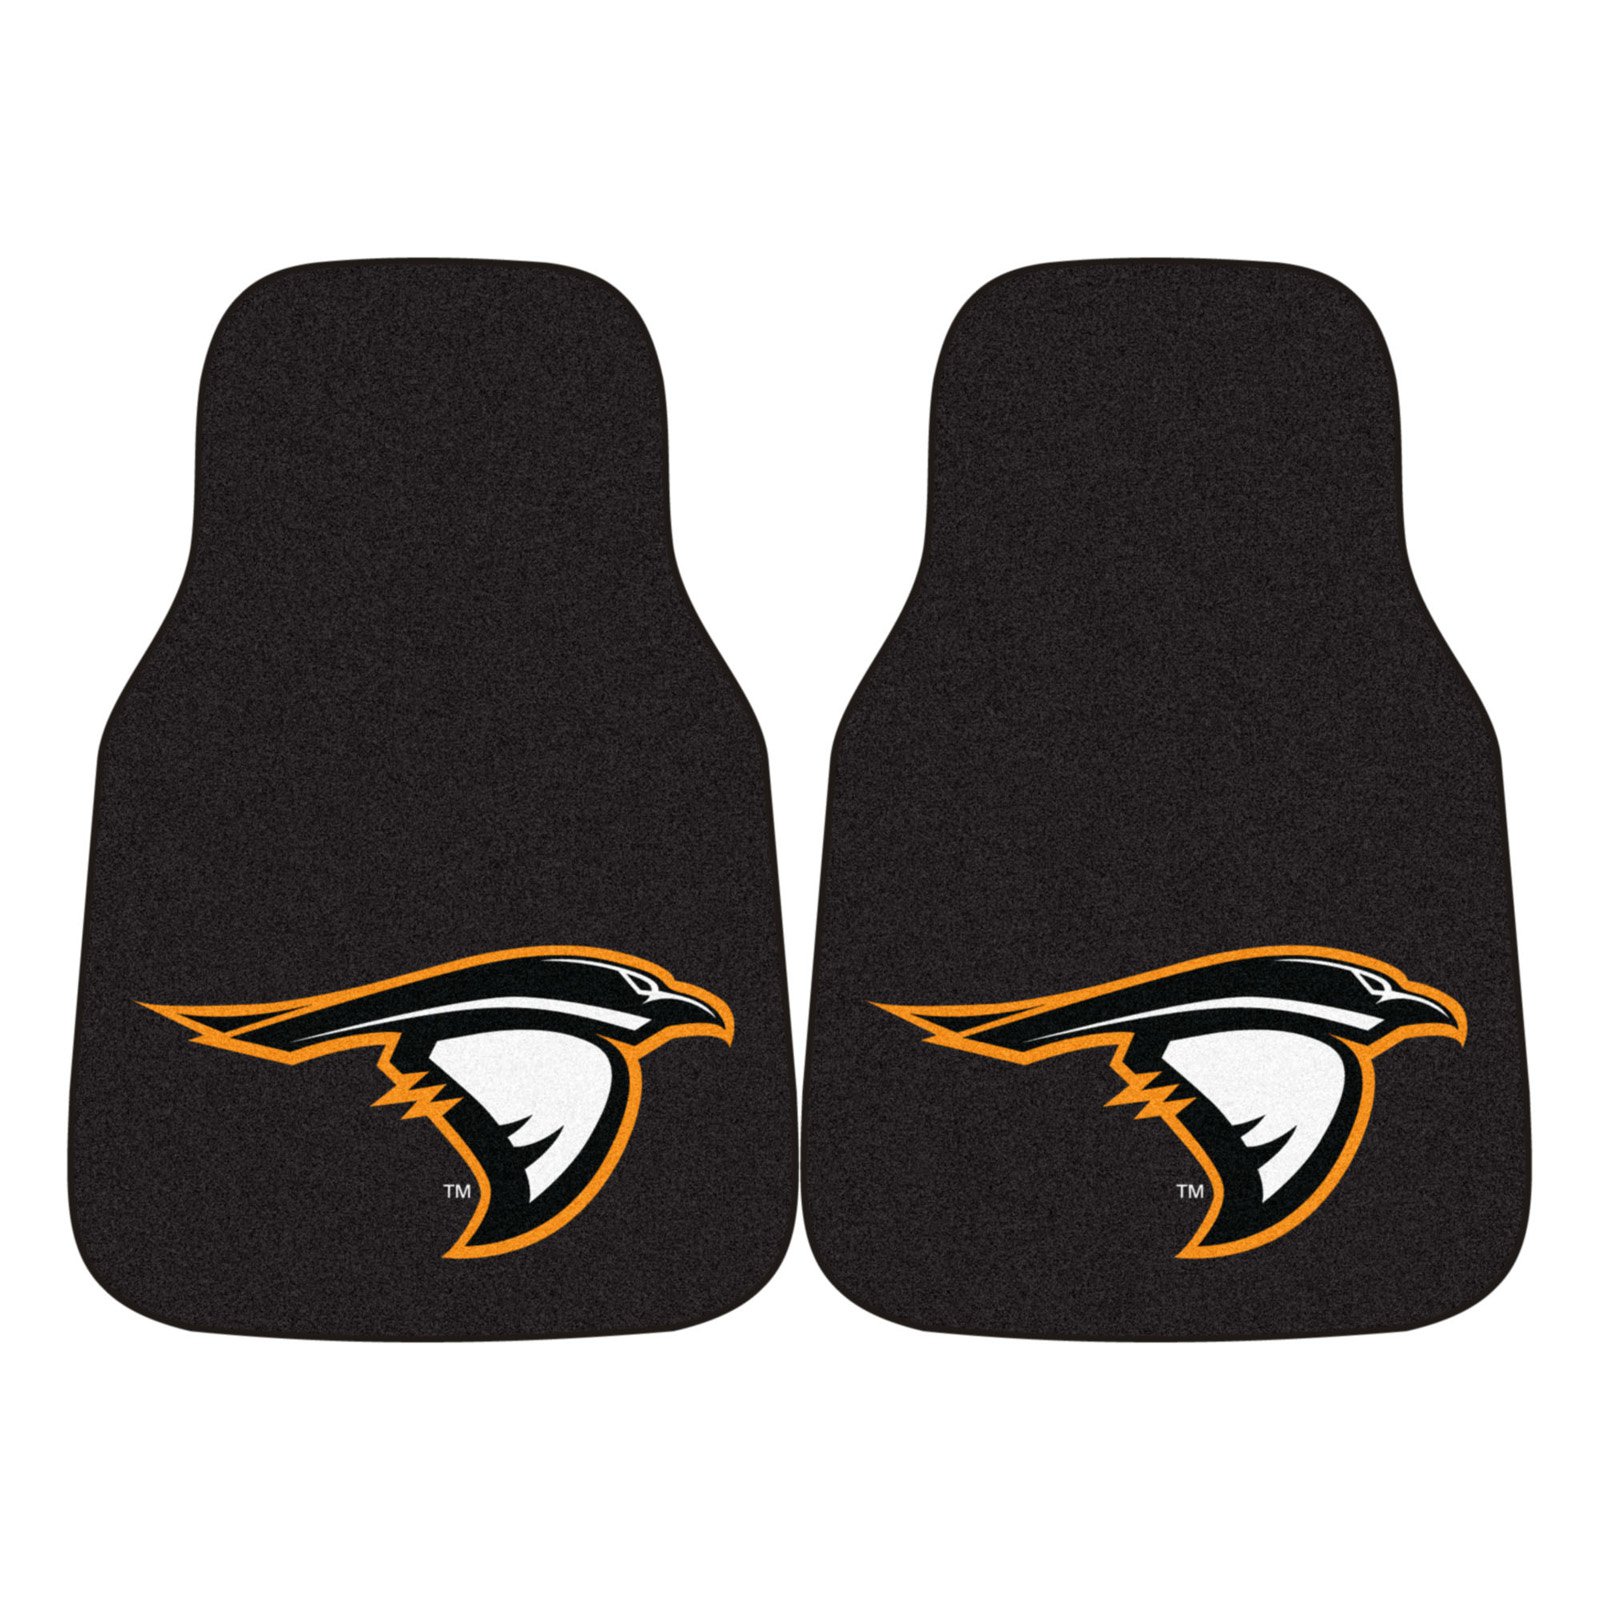 Fanmats Anderson (In) 2Pc Carpeted Car Mats FMT-18427 - image 1 of 2